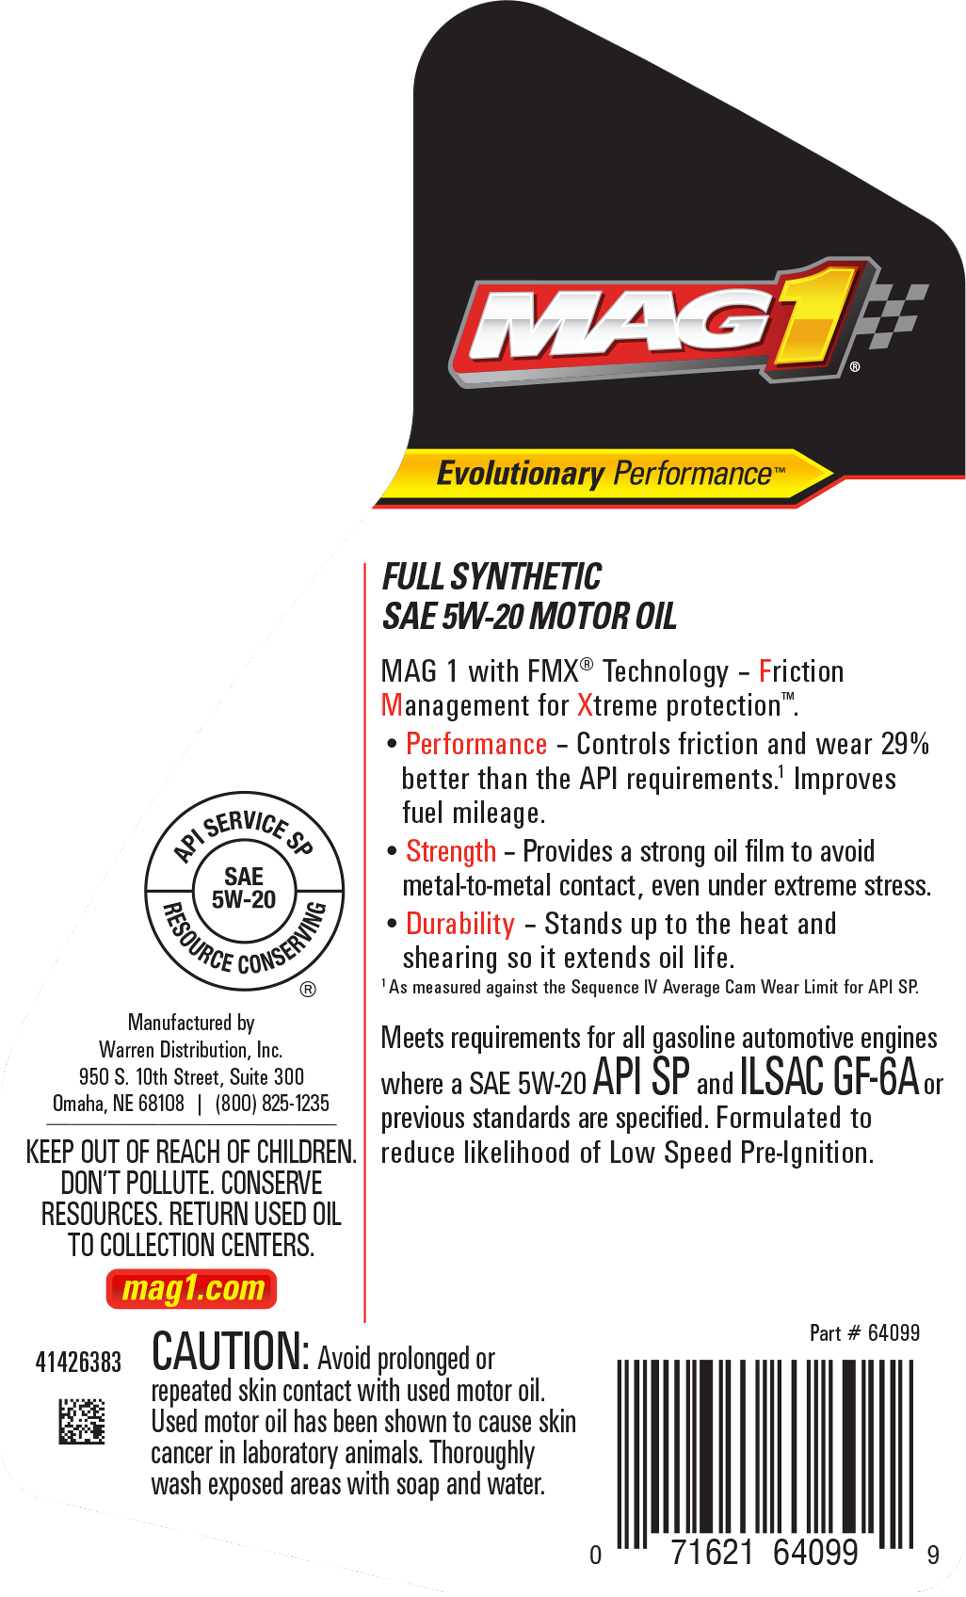 MAG 1® Full Synthetic 5W-20 Motor Oil - Mag 1